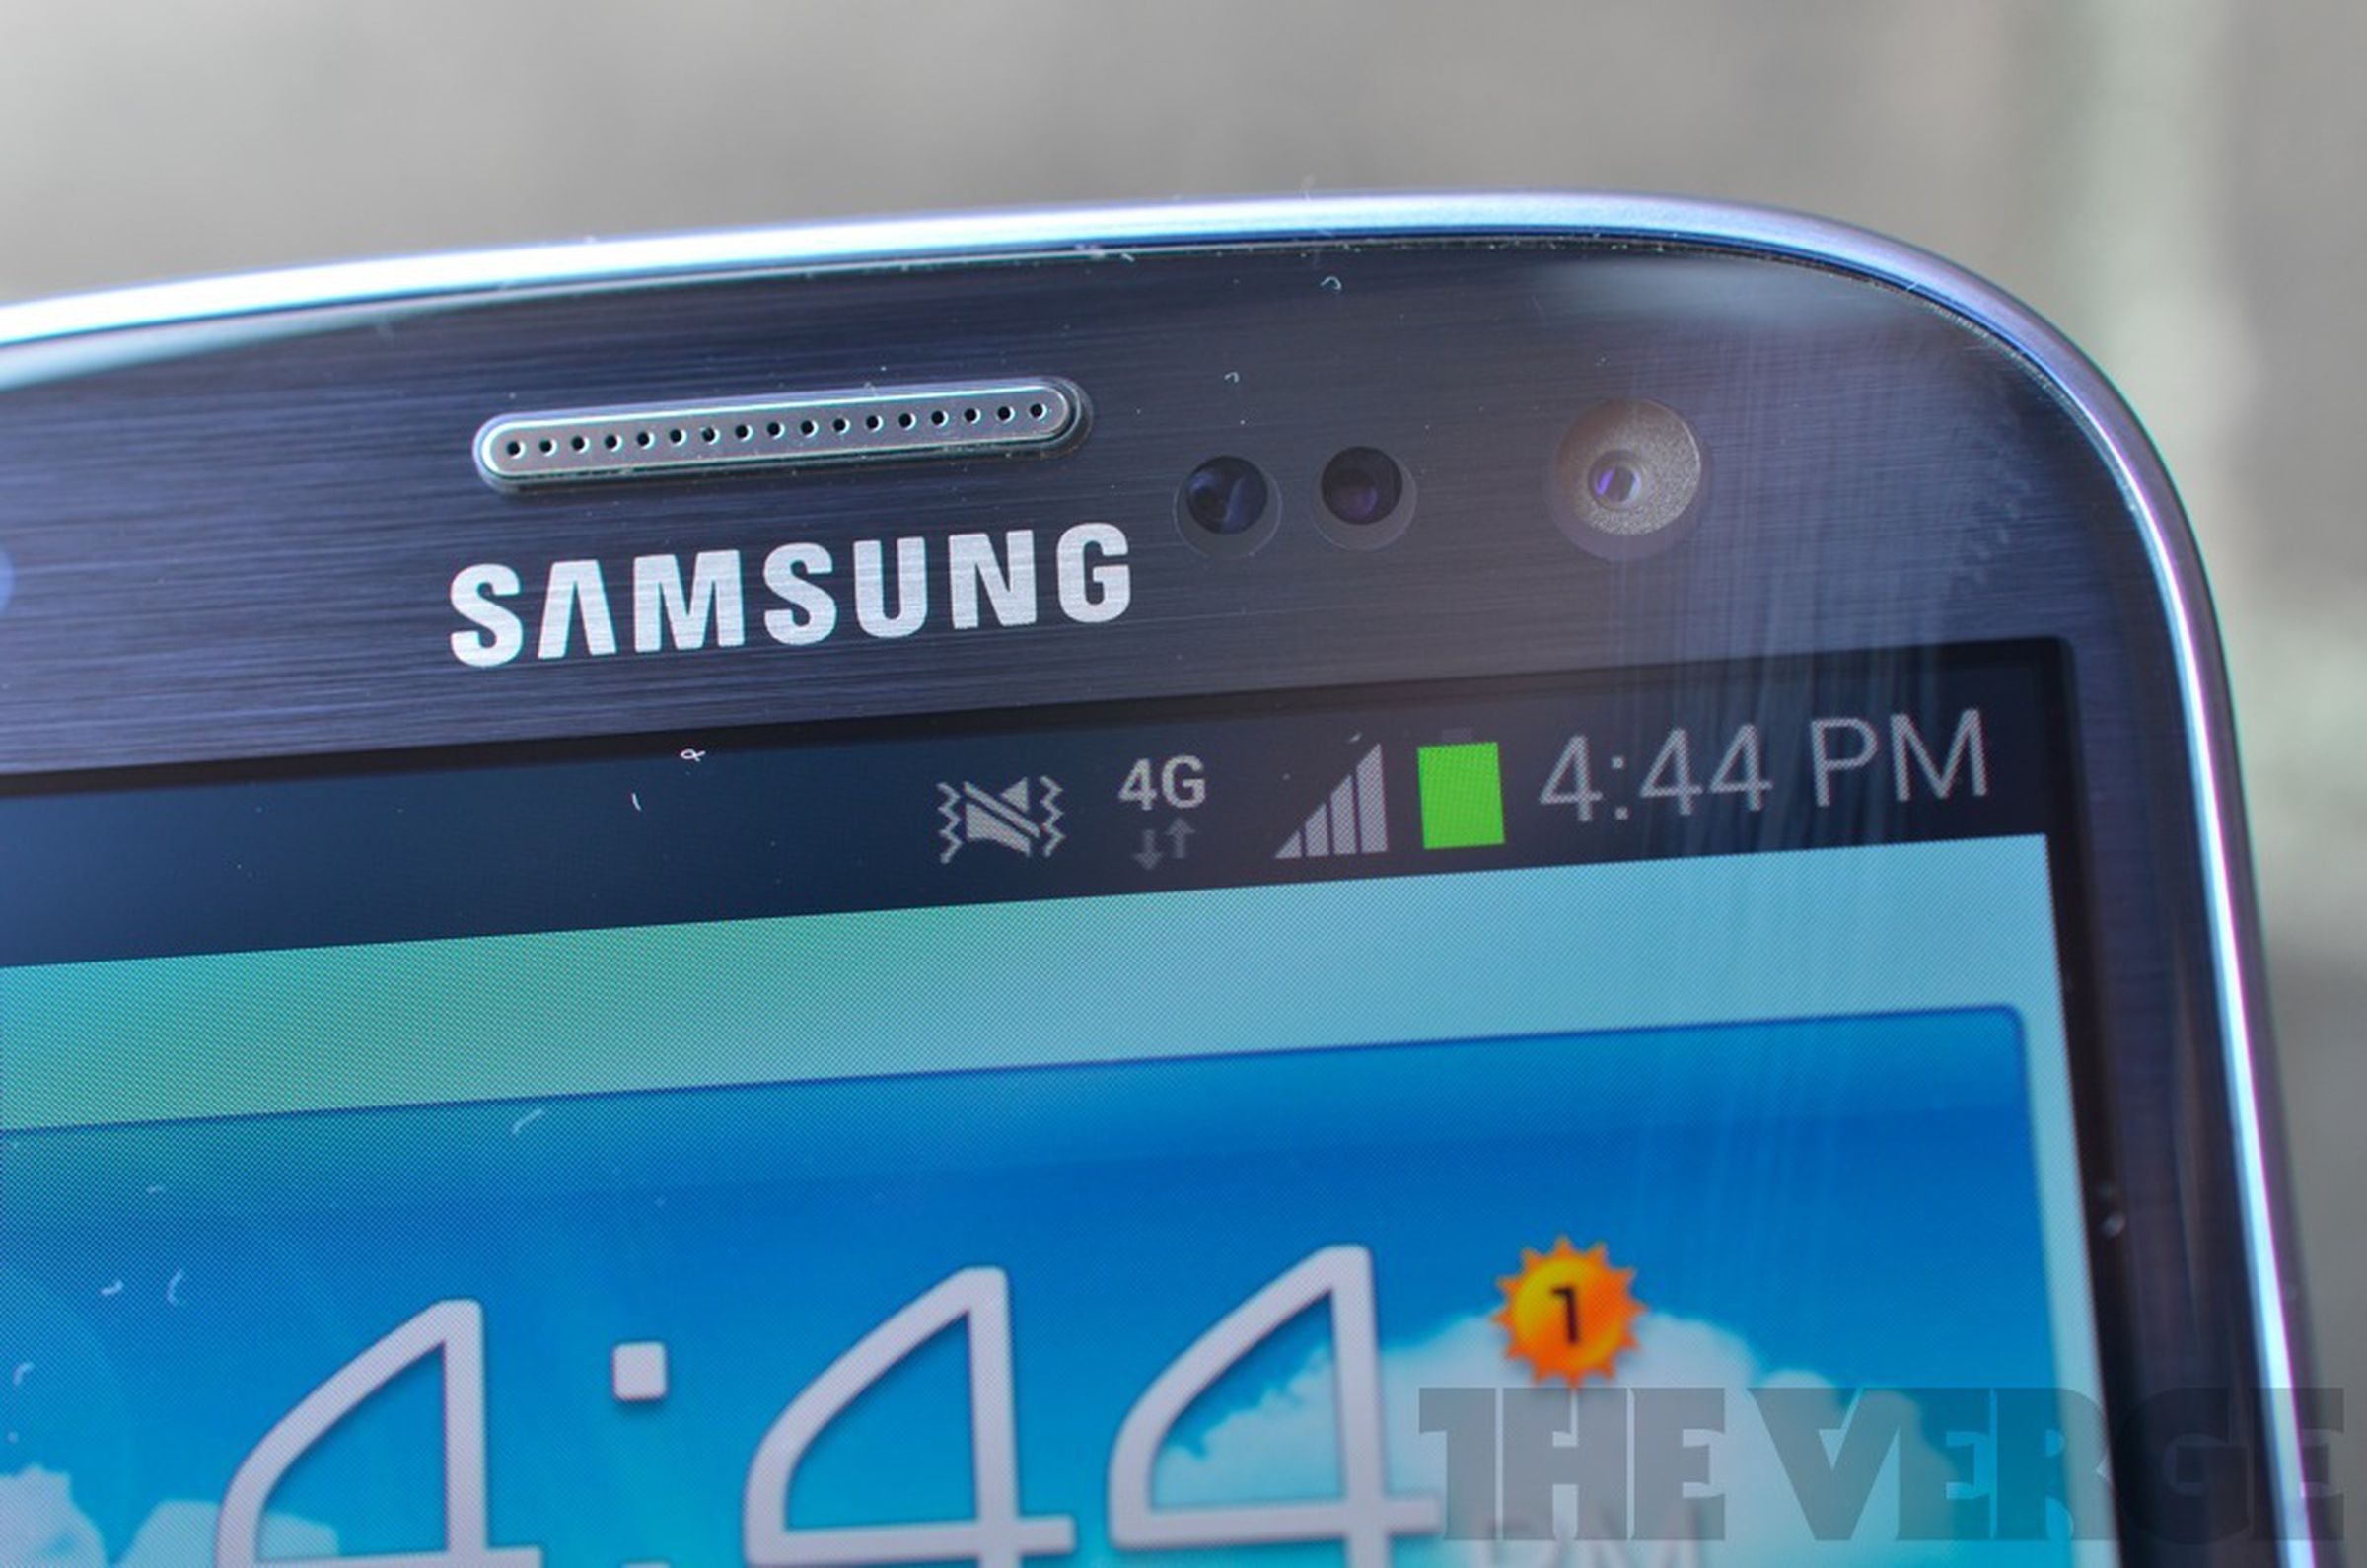 Samsung Galaxy S III for T-Mobile hands-on pictures